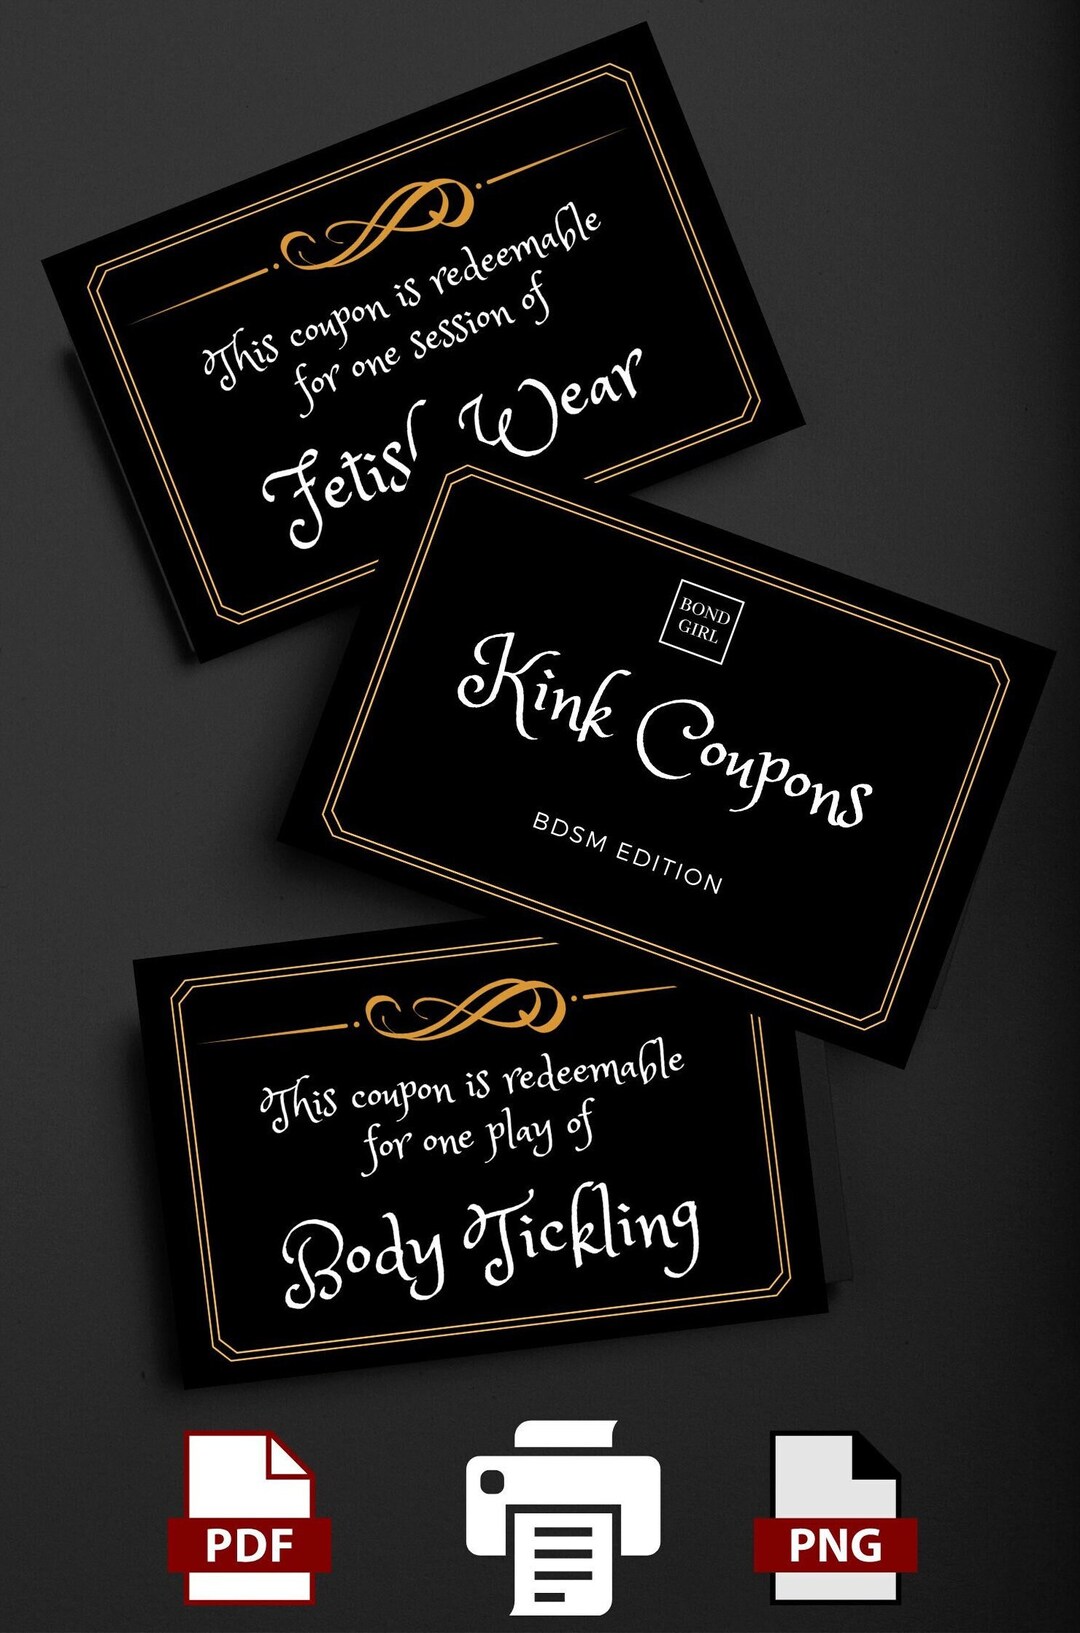 31-printable-kink-coupons-bdsm-edition-love-and-relationship-etsy